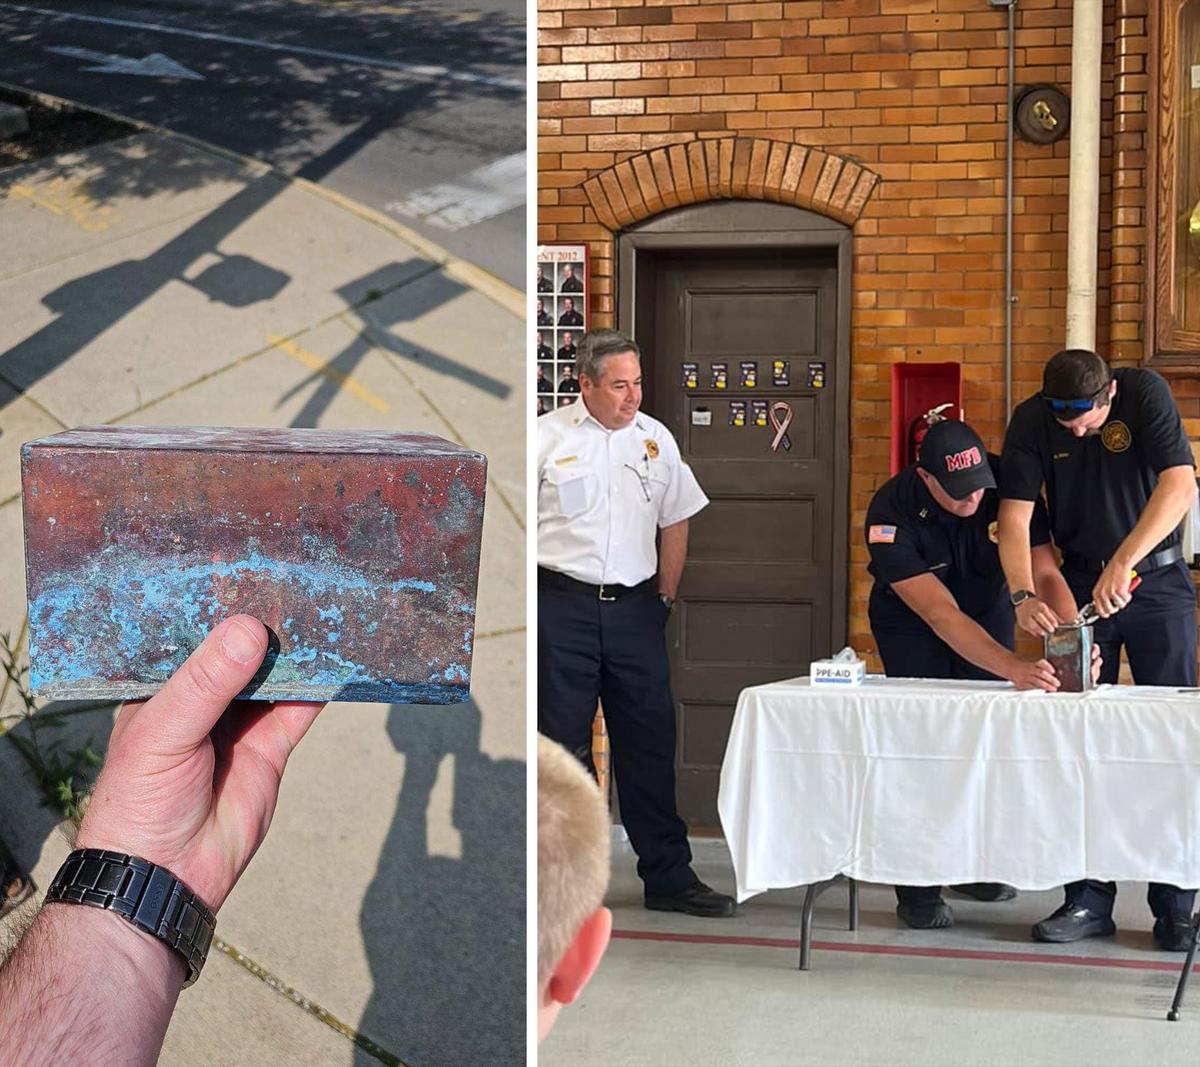 Firefighters display a time capsule discovered while preserving the cornerstone of old Station One of the Marion Ohio Fire Department. (Courtesy of City of Marion Ohio Fire Department)